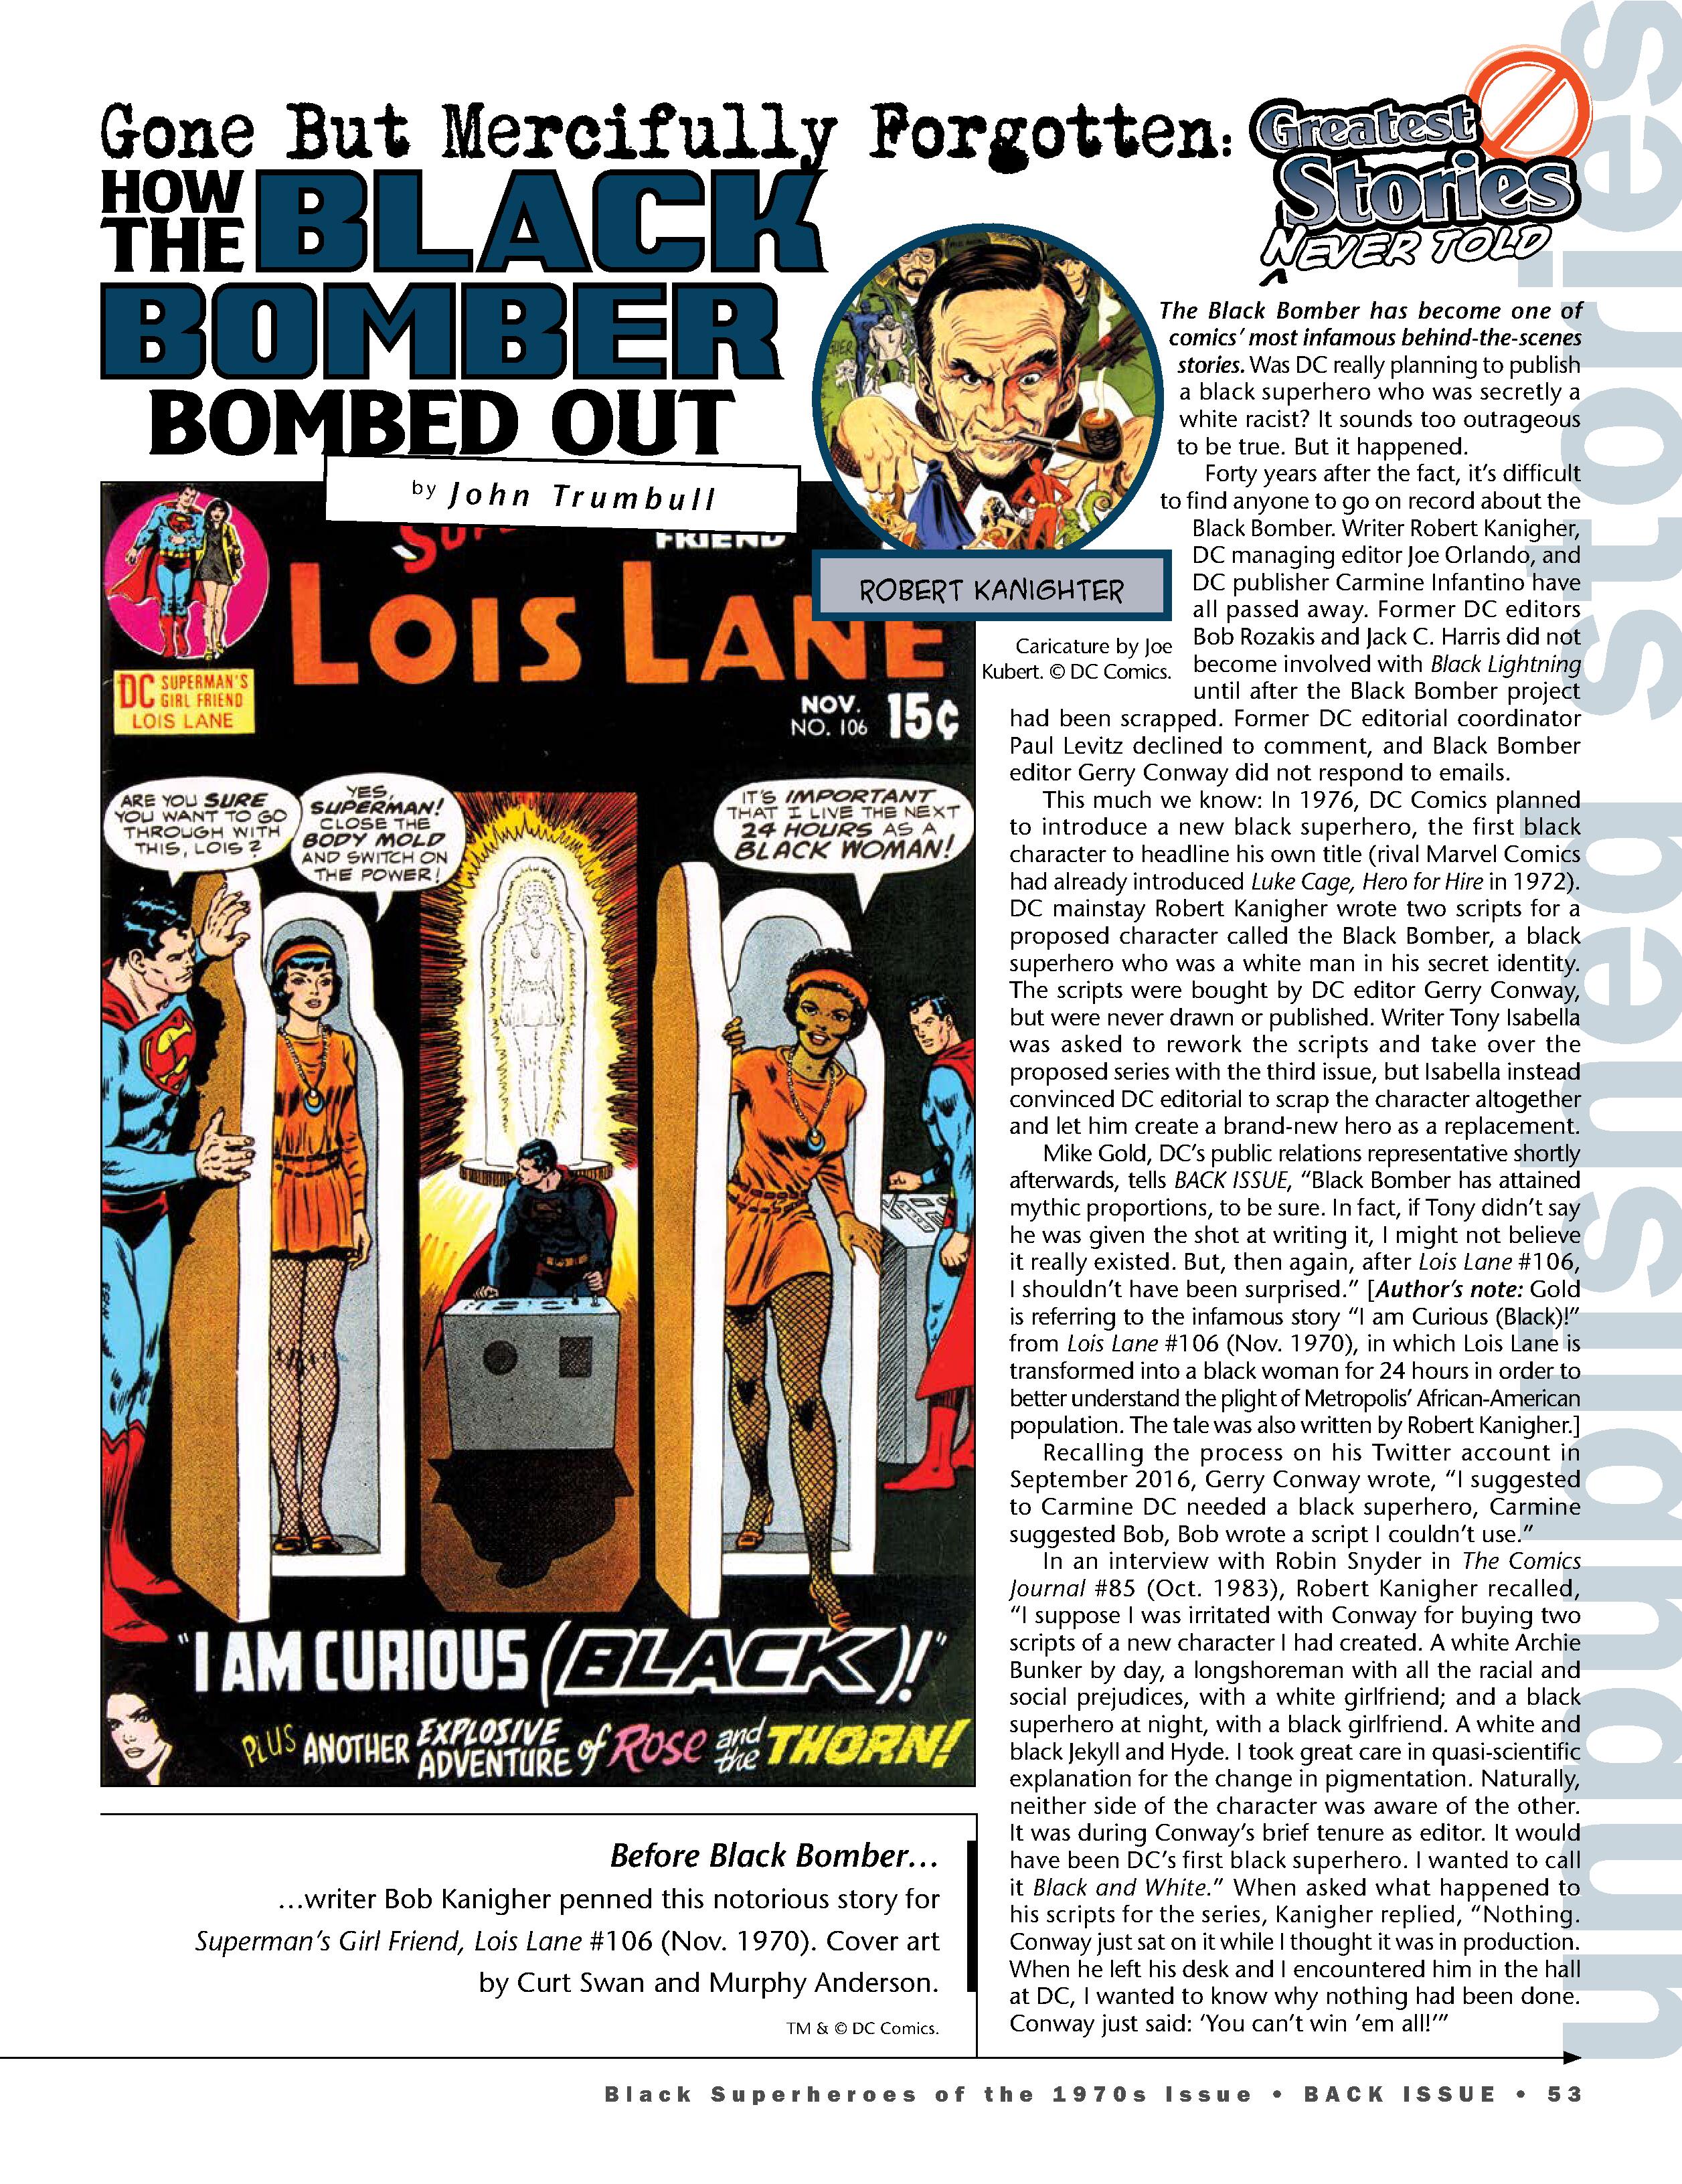 Read online Back Issue comic -  Issue #114 - 55